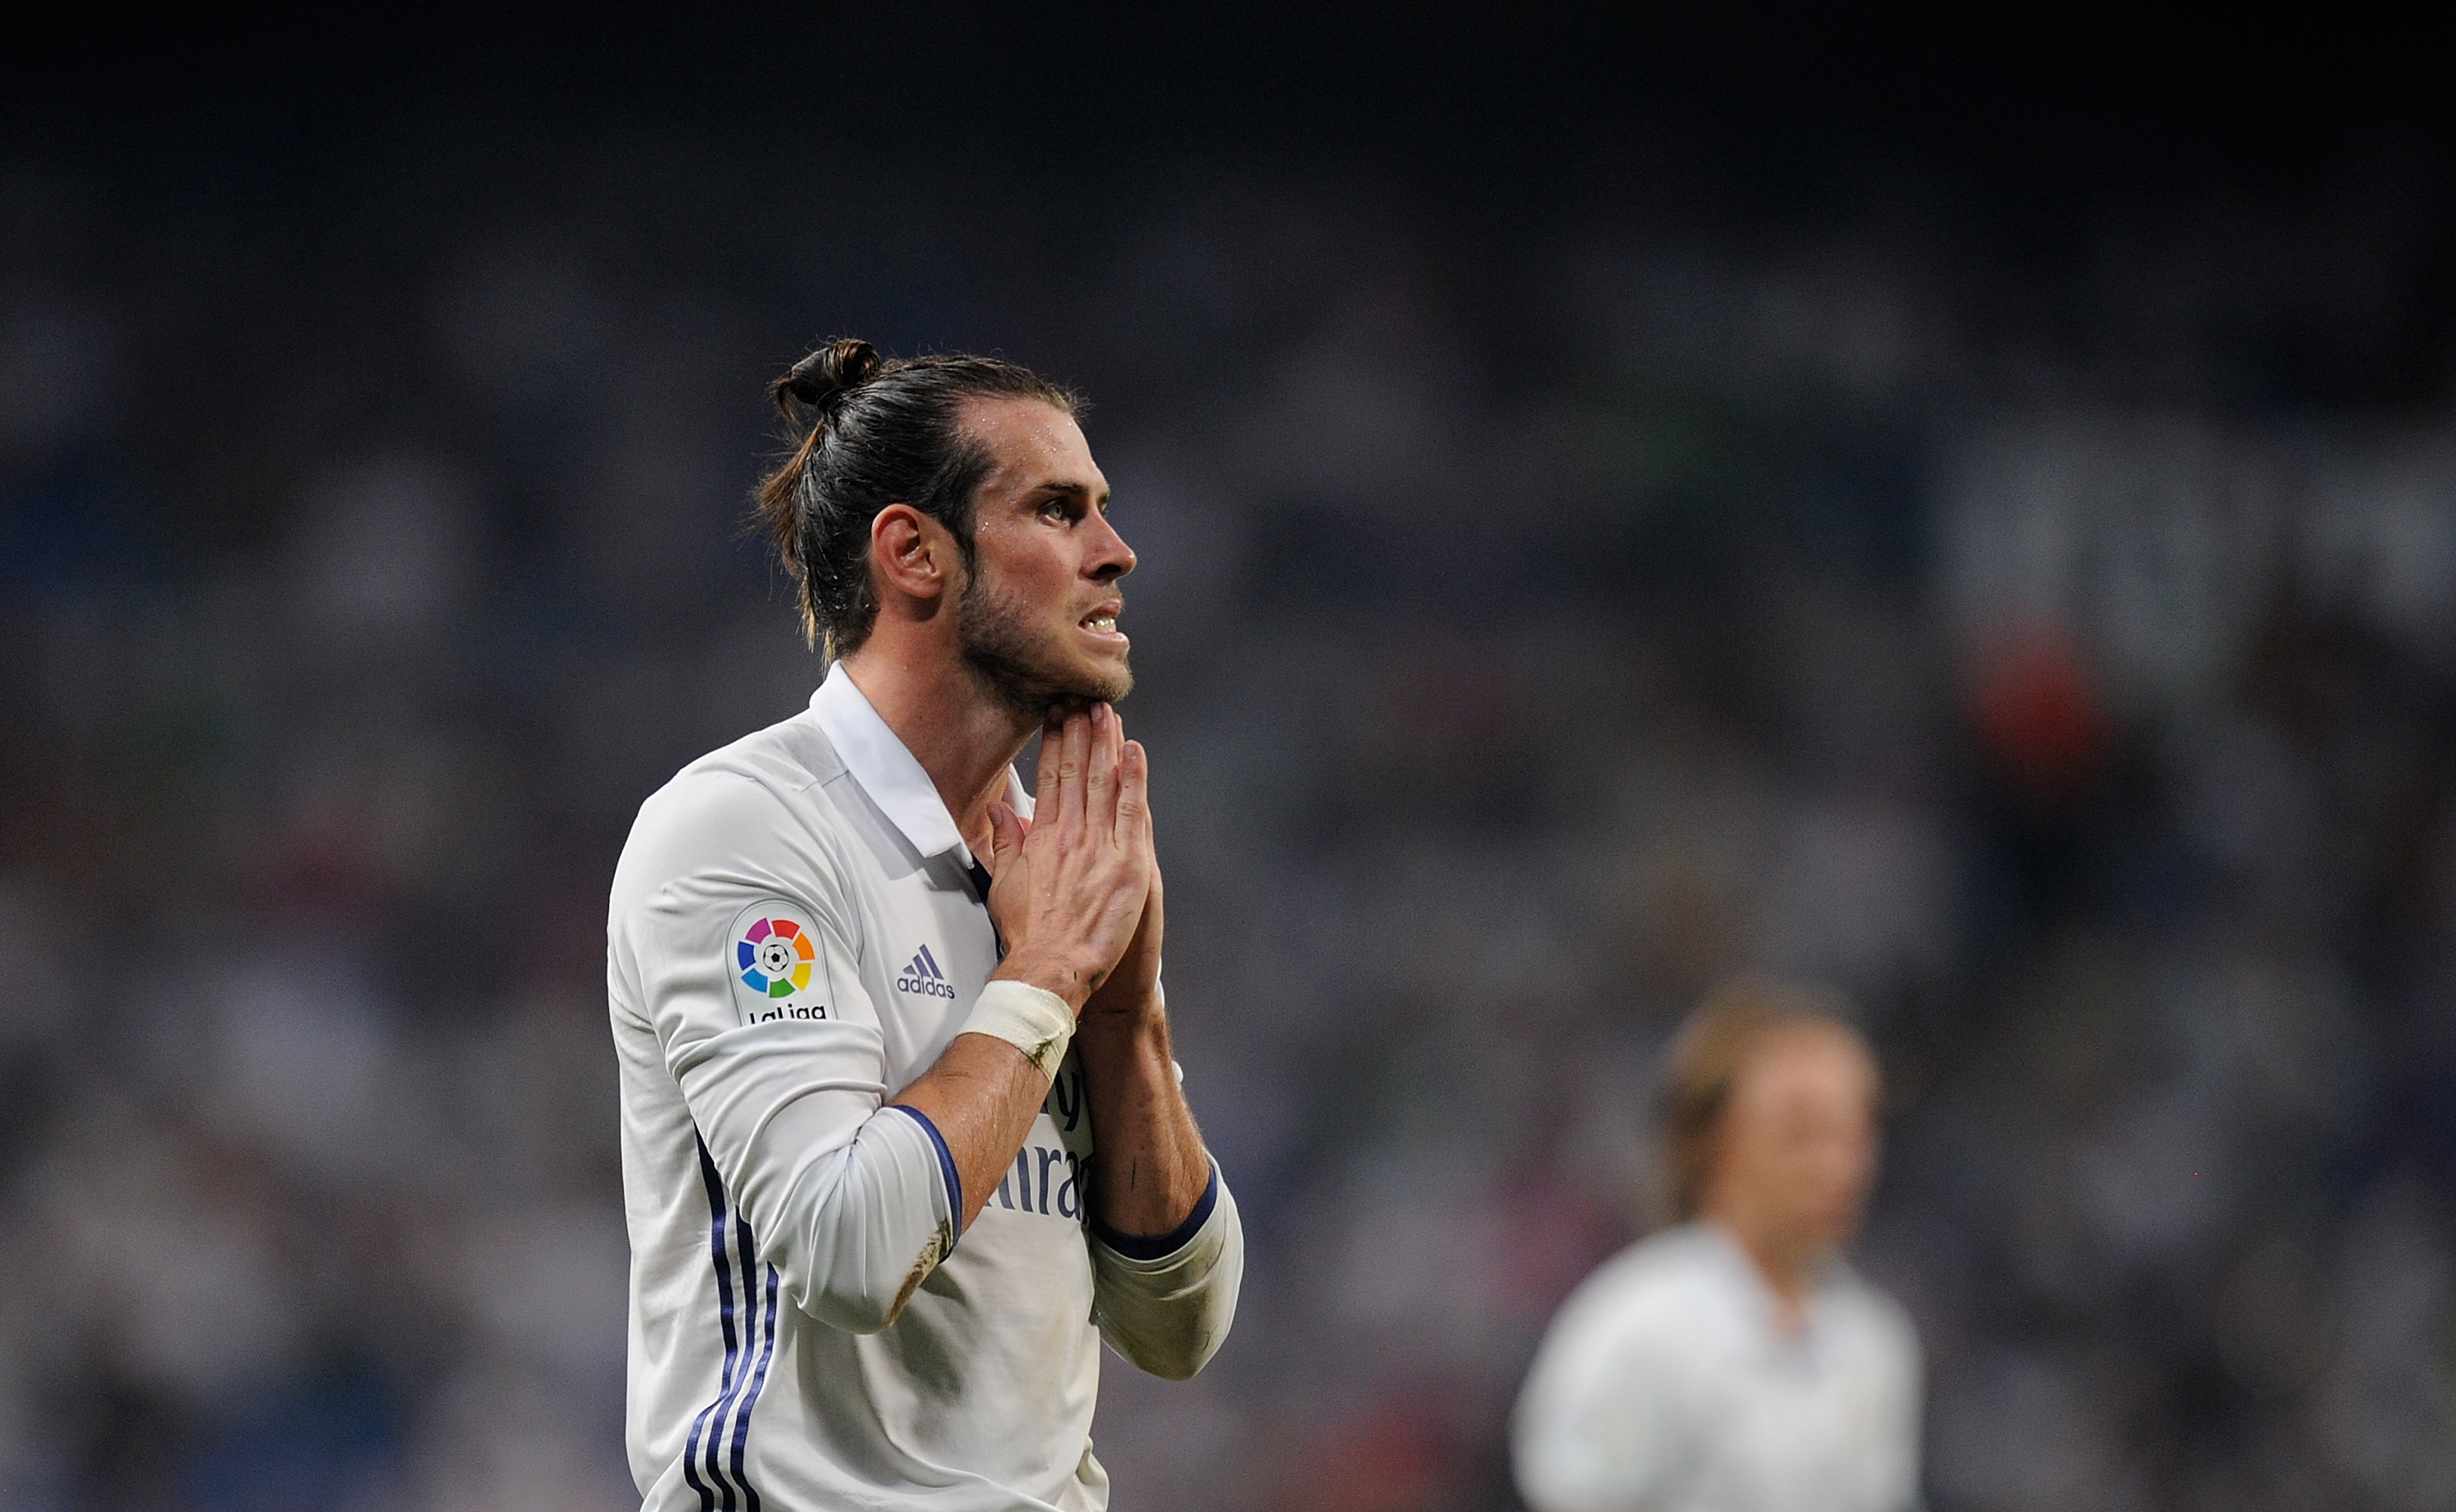 MADRID, SPAIN - AUGUST 27:  Gareth Bale of Real Madrid reacts during the La Liga match between Real Madrid CF and RC Celta de Vigo at Estadio Santiago Bernabeu on August 27, 2016 in Madrid, Spain.  (Photo by Denis Doyle/Getty Images)